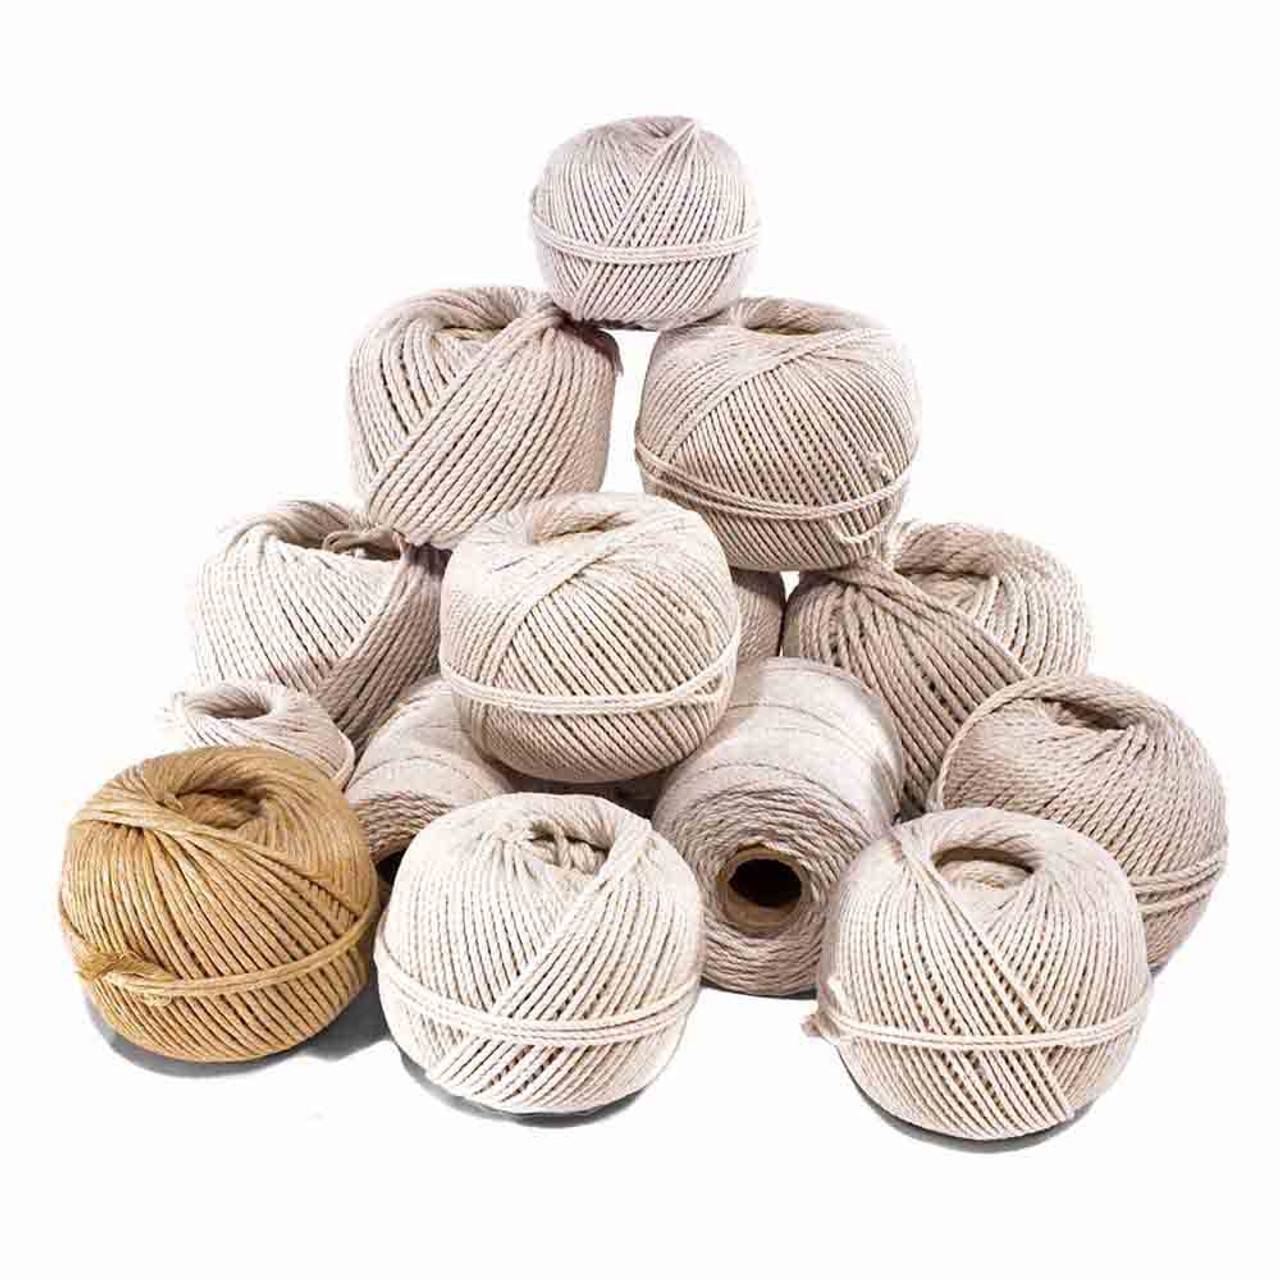 Frank Winne and Son Jute Twine - Natural, Ball, 4-Ply, 1420 ft